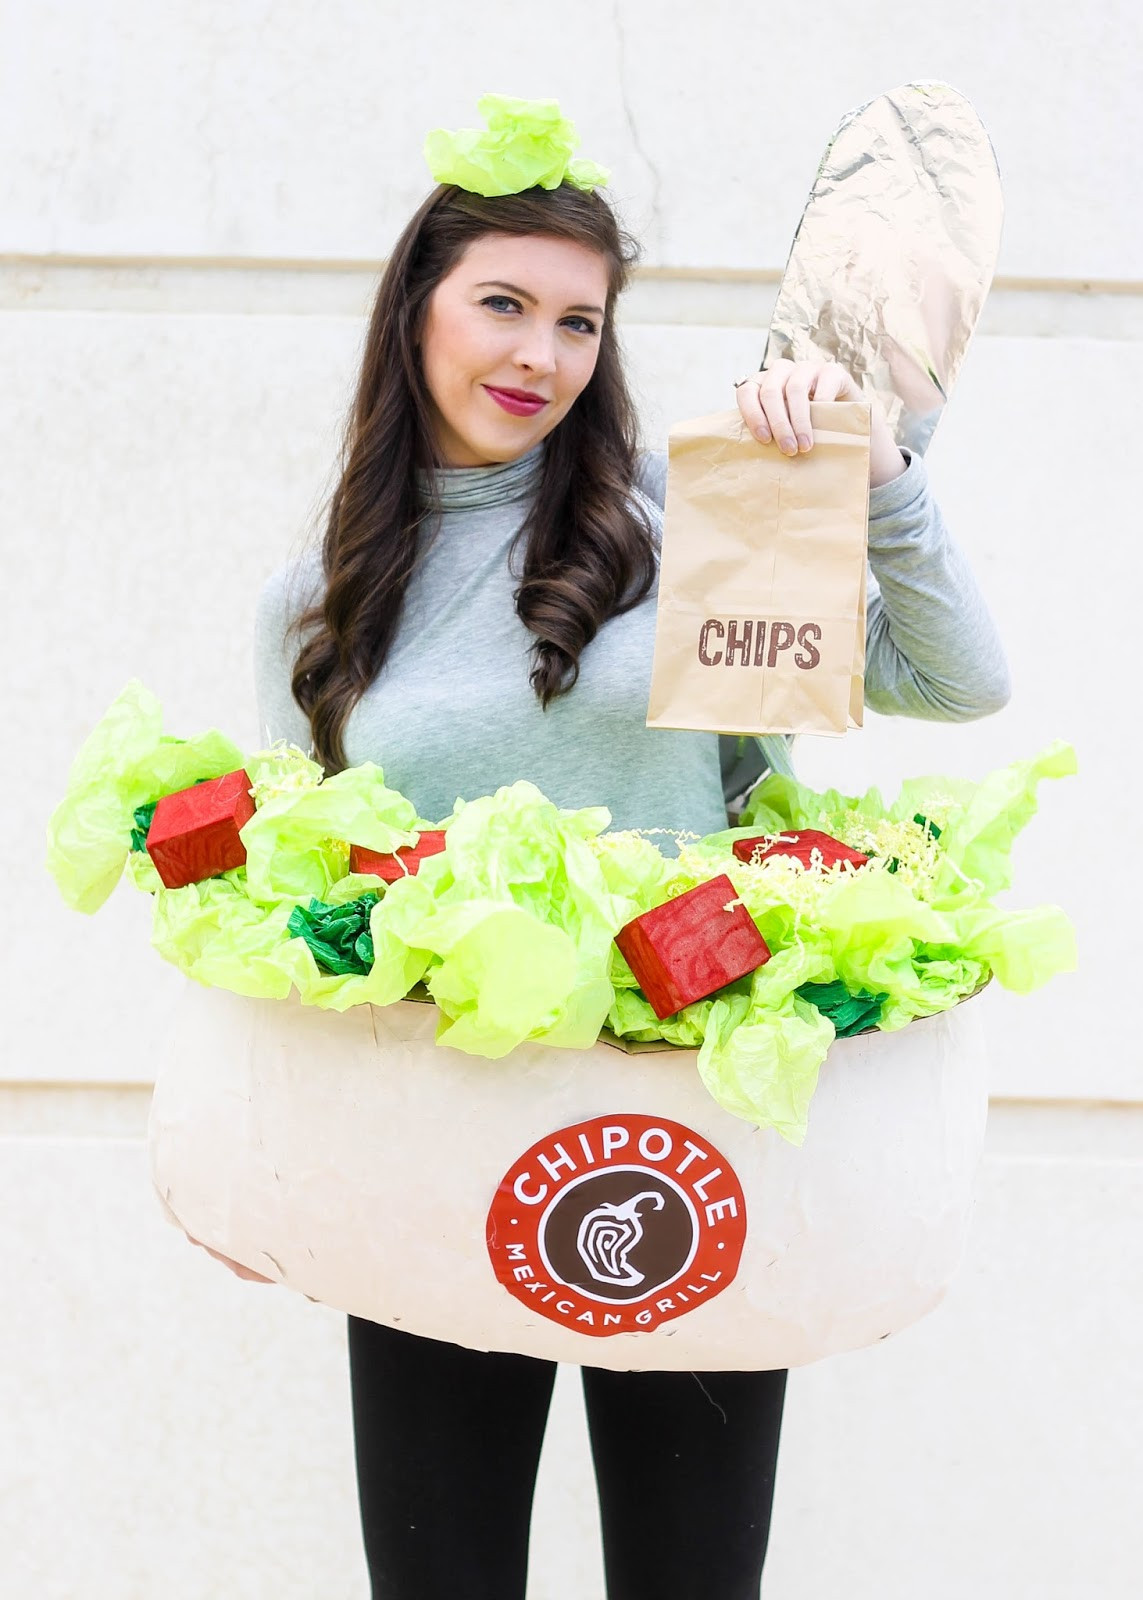 DIY Toddler Costumes
 Halloween Chipotle Costume DIY Pretty in the Pines